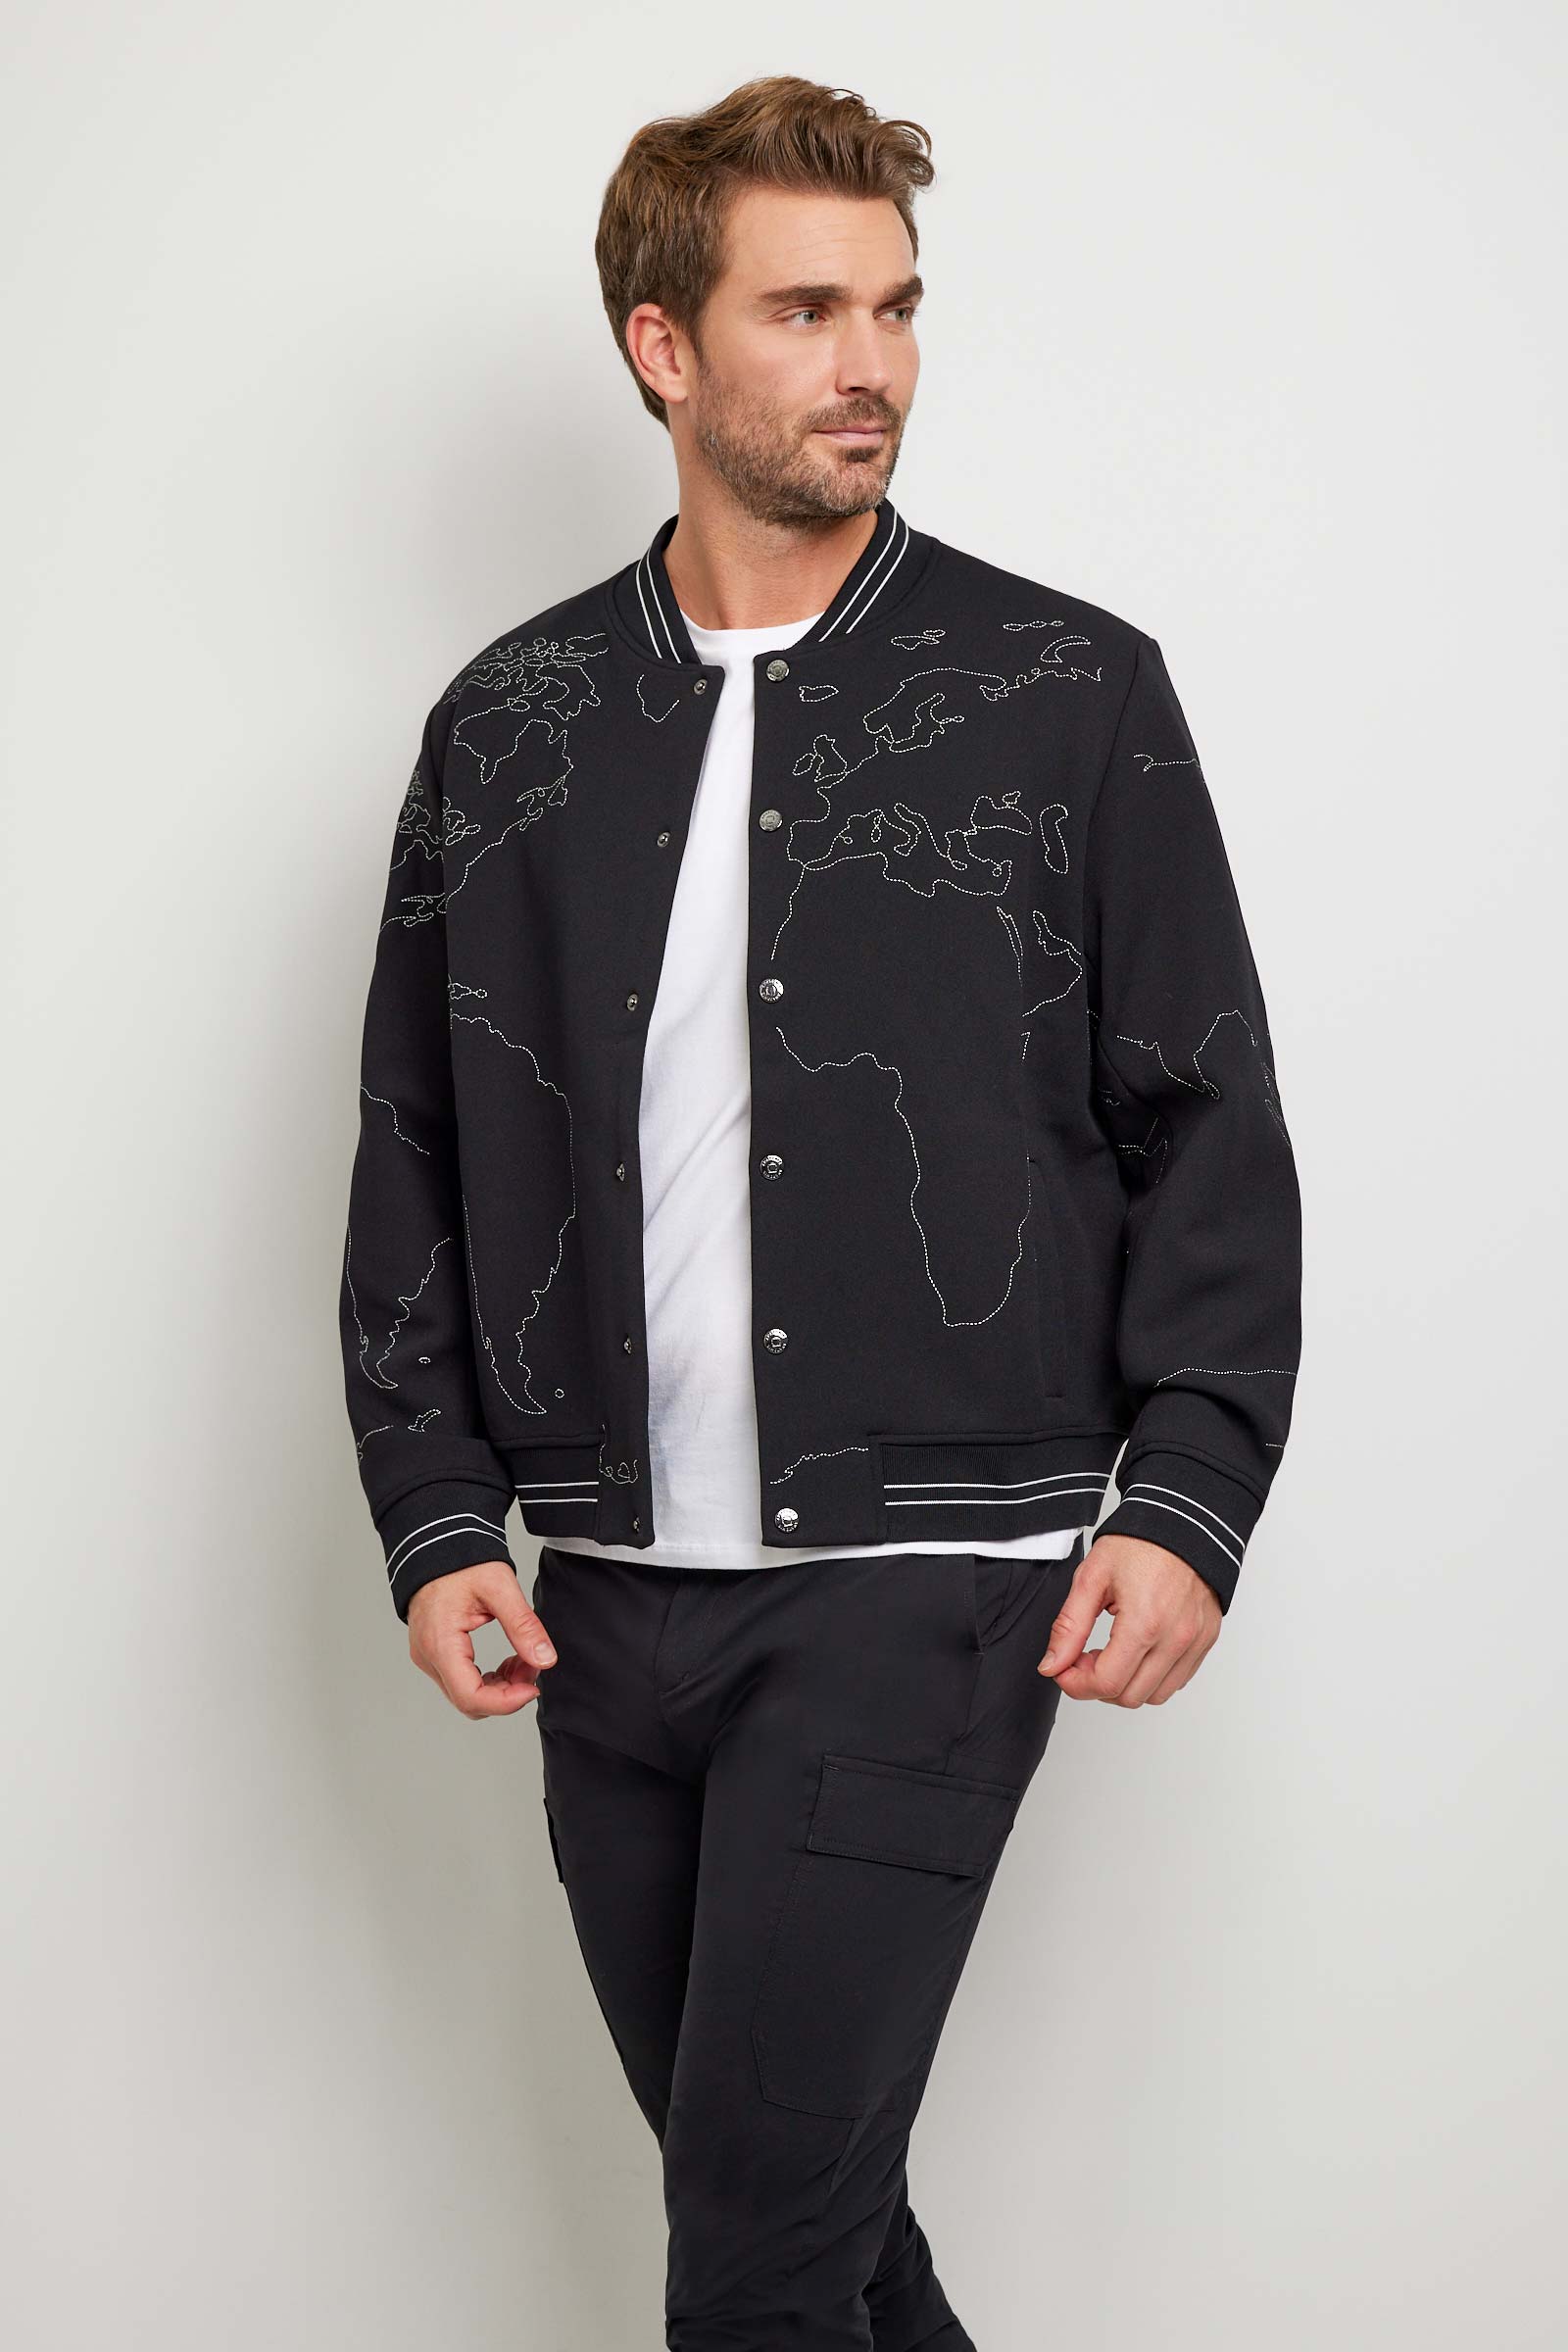 The Best Travel Jacket. Man Showing the Front Profile of a Map Bomber Jacket in Black.